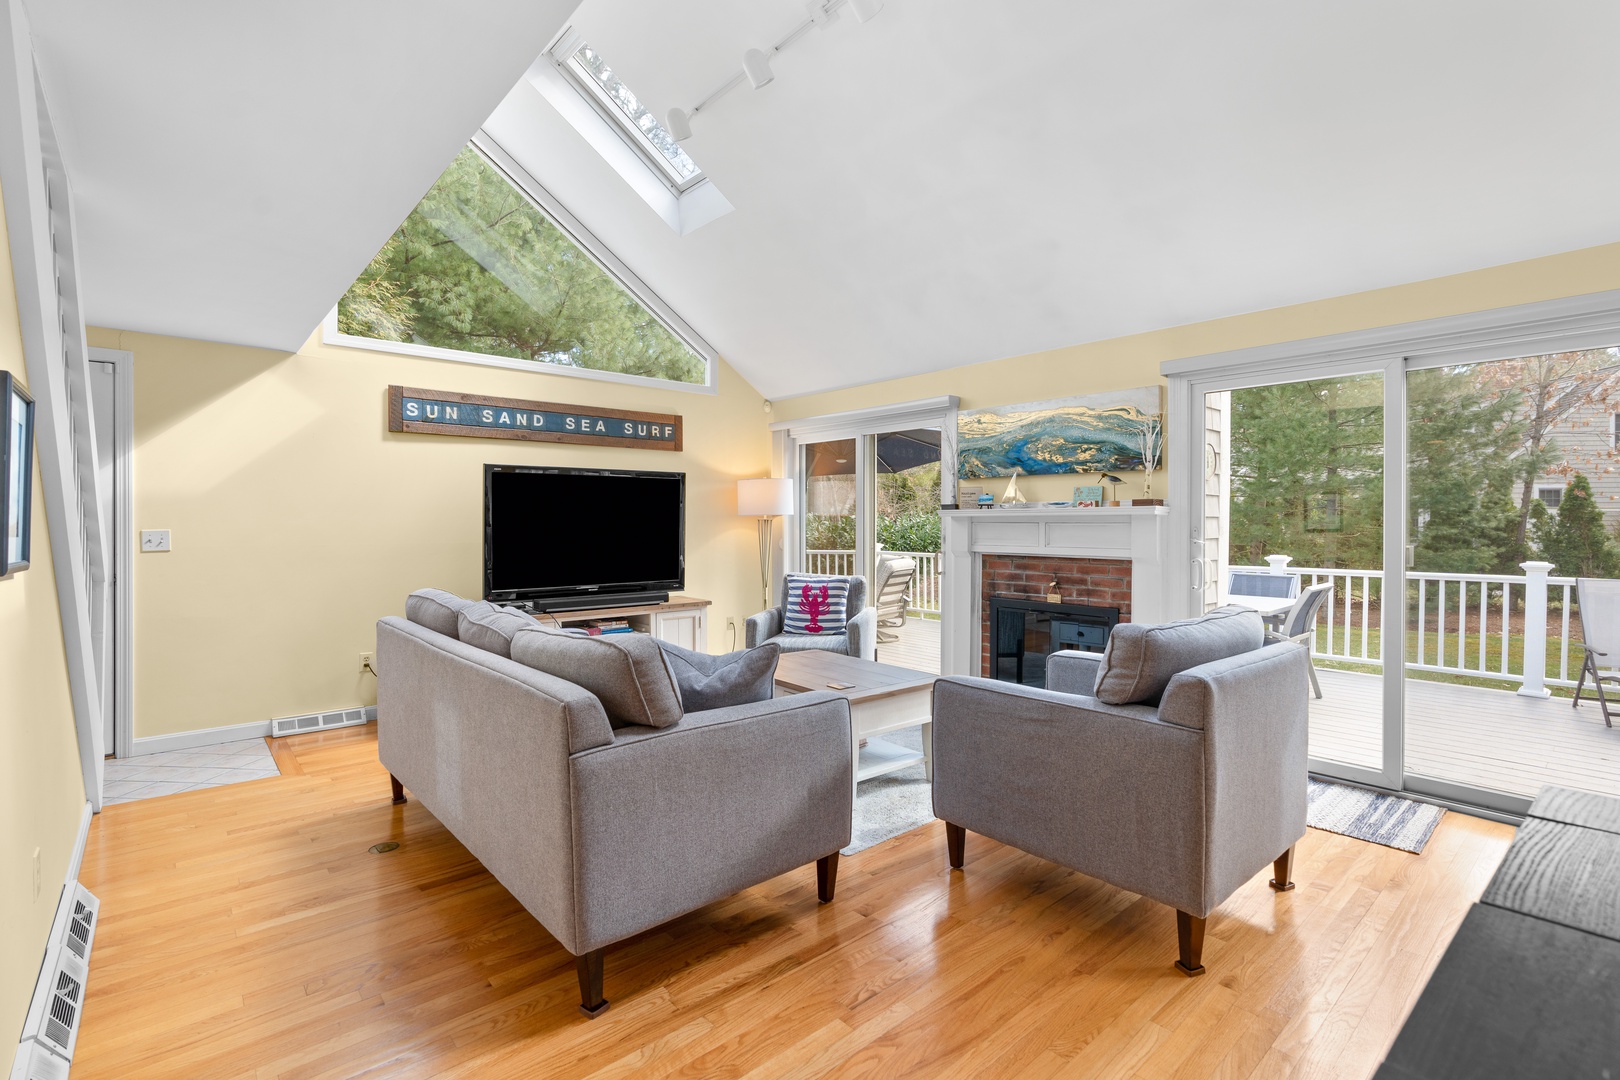 Bright spacious living area with ample seating, and Smart TV